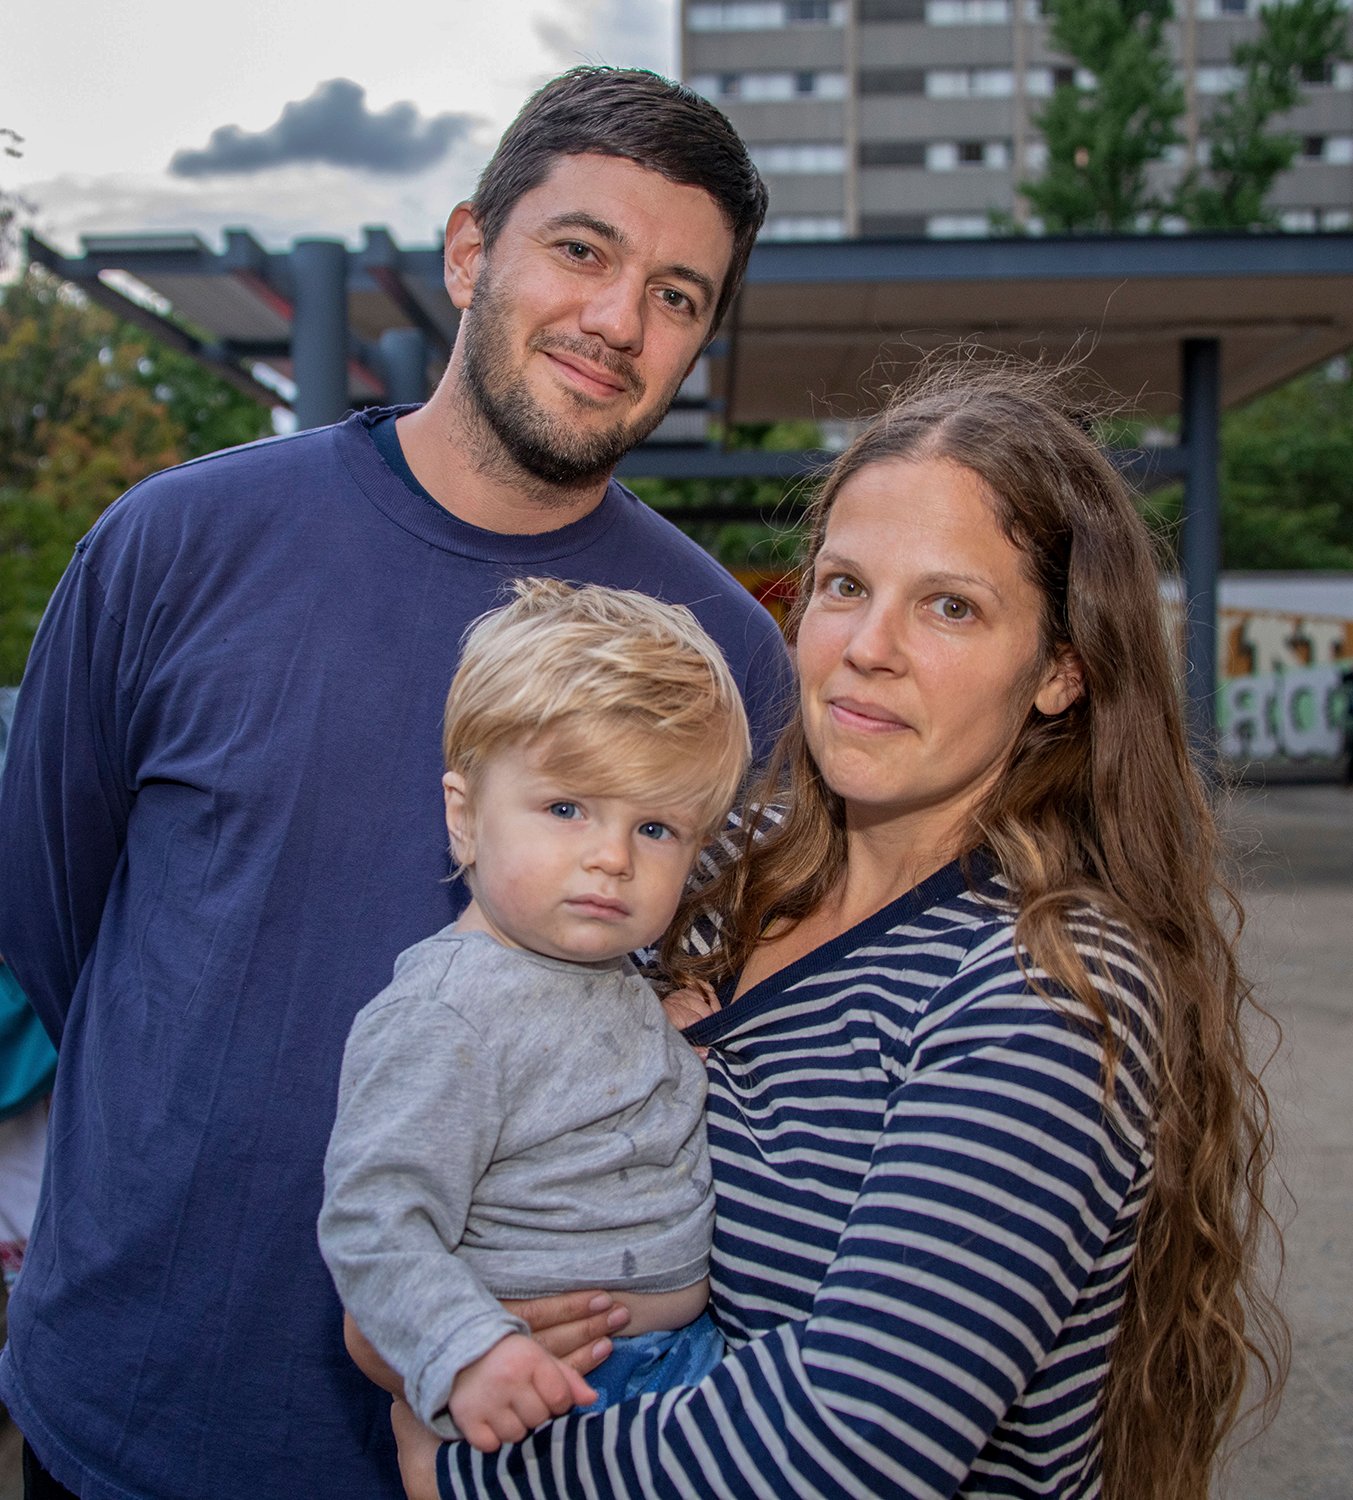 Micah Danges, Becky Suss, and their son. Photograph by Constance Mensh. 